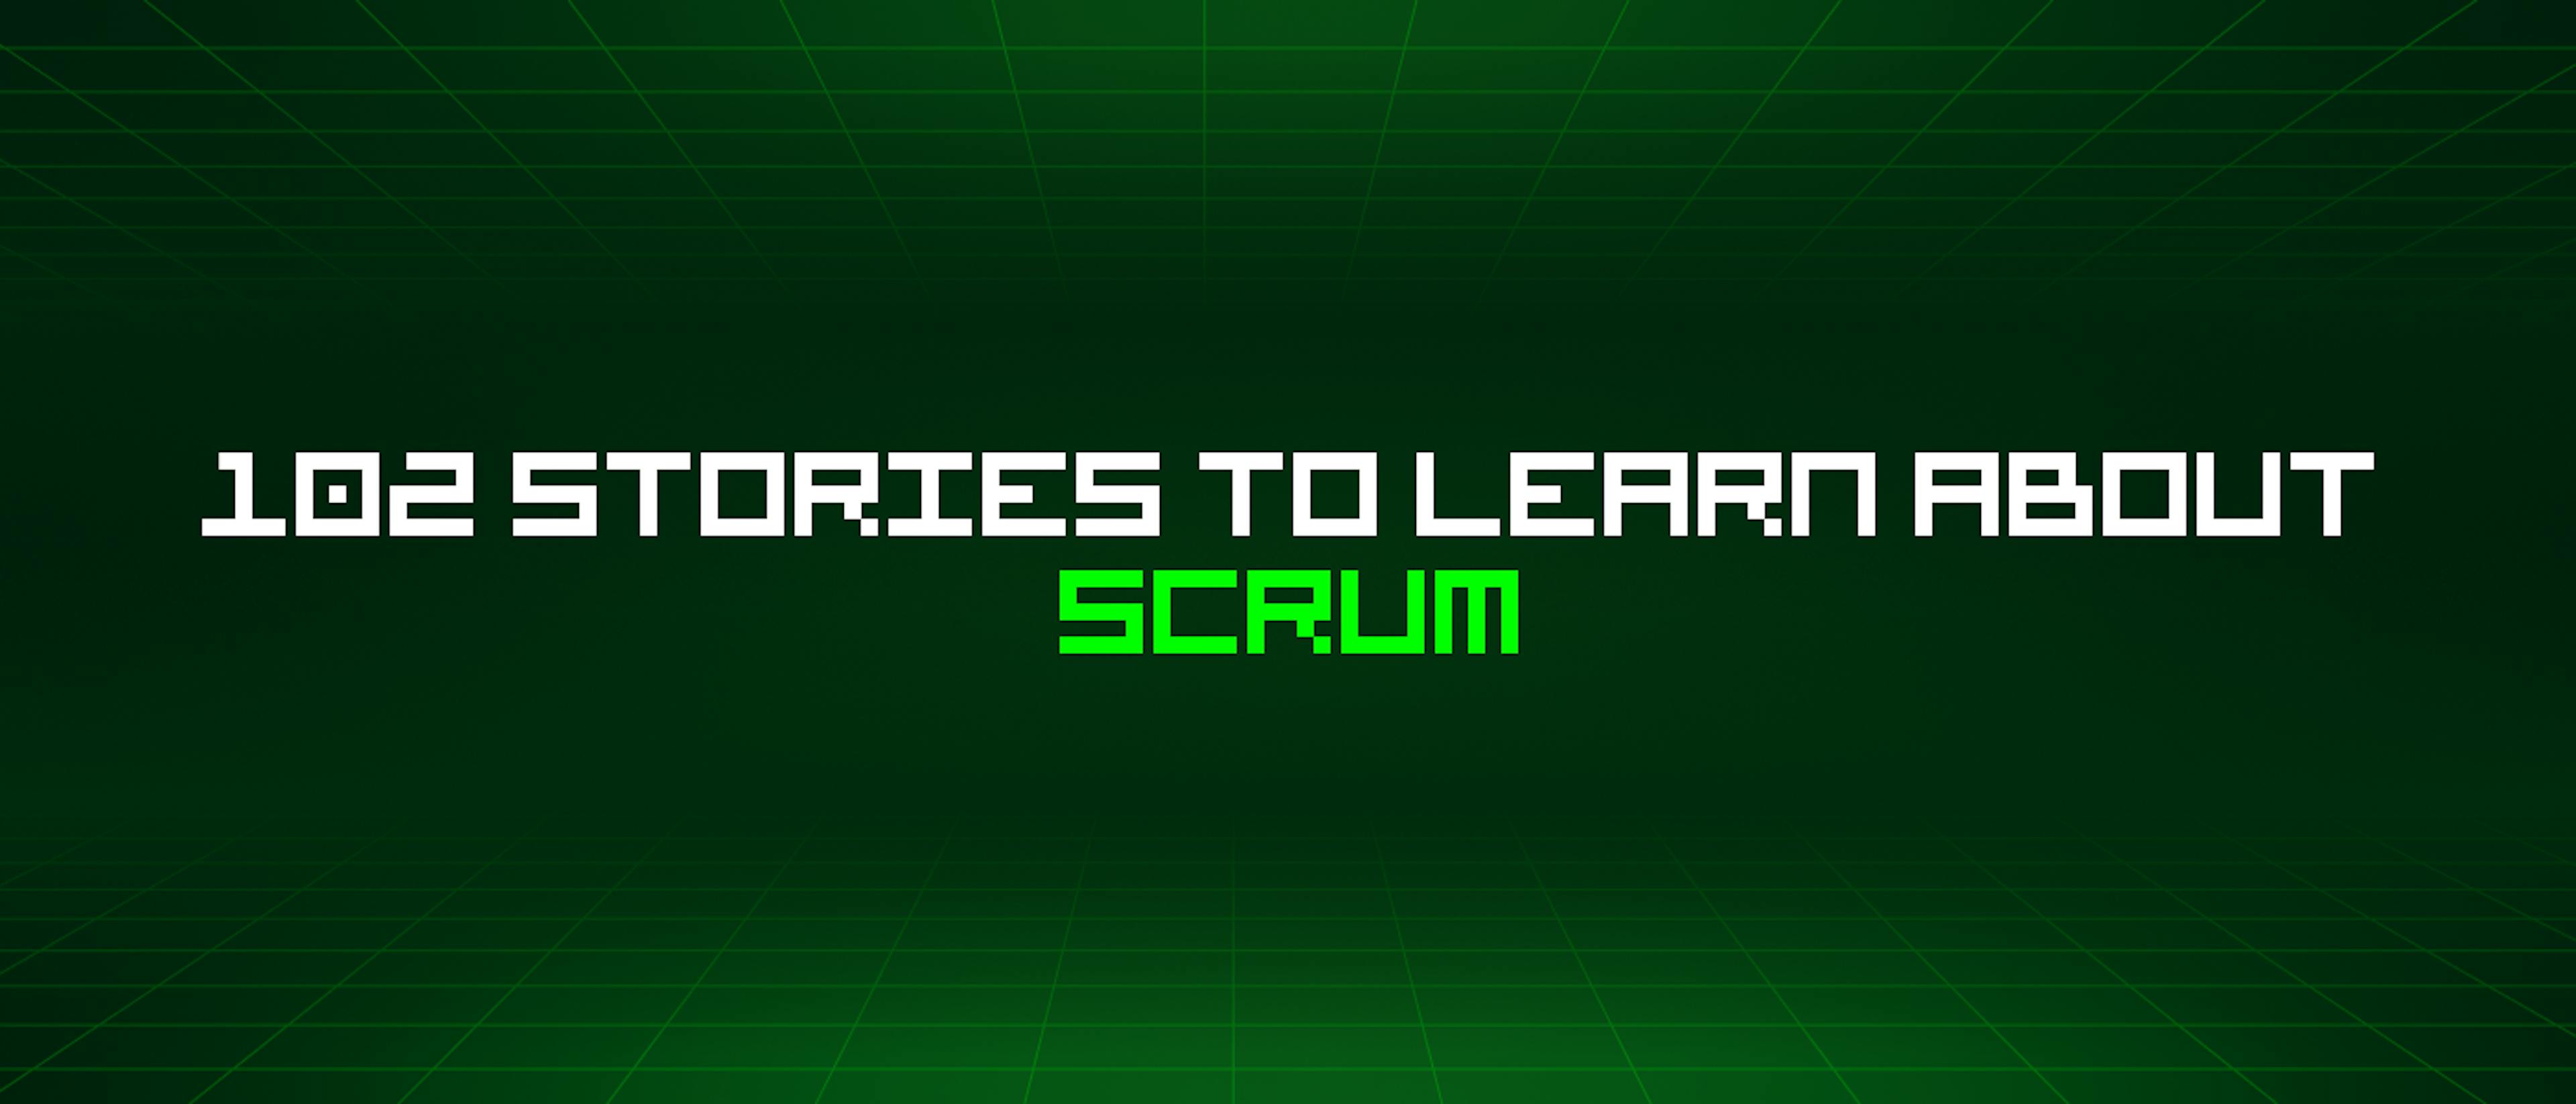 /102-stories-to-learn-about-scrum feature image